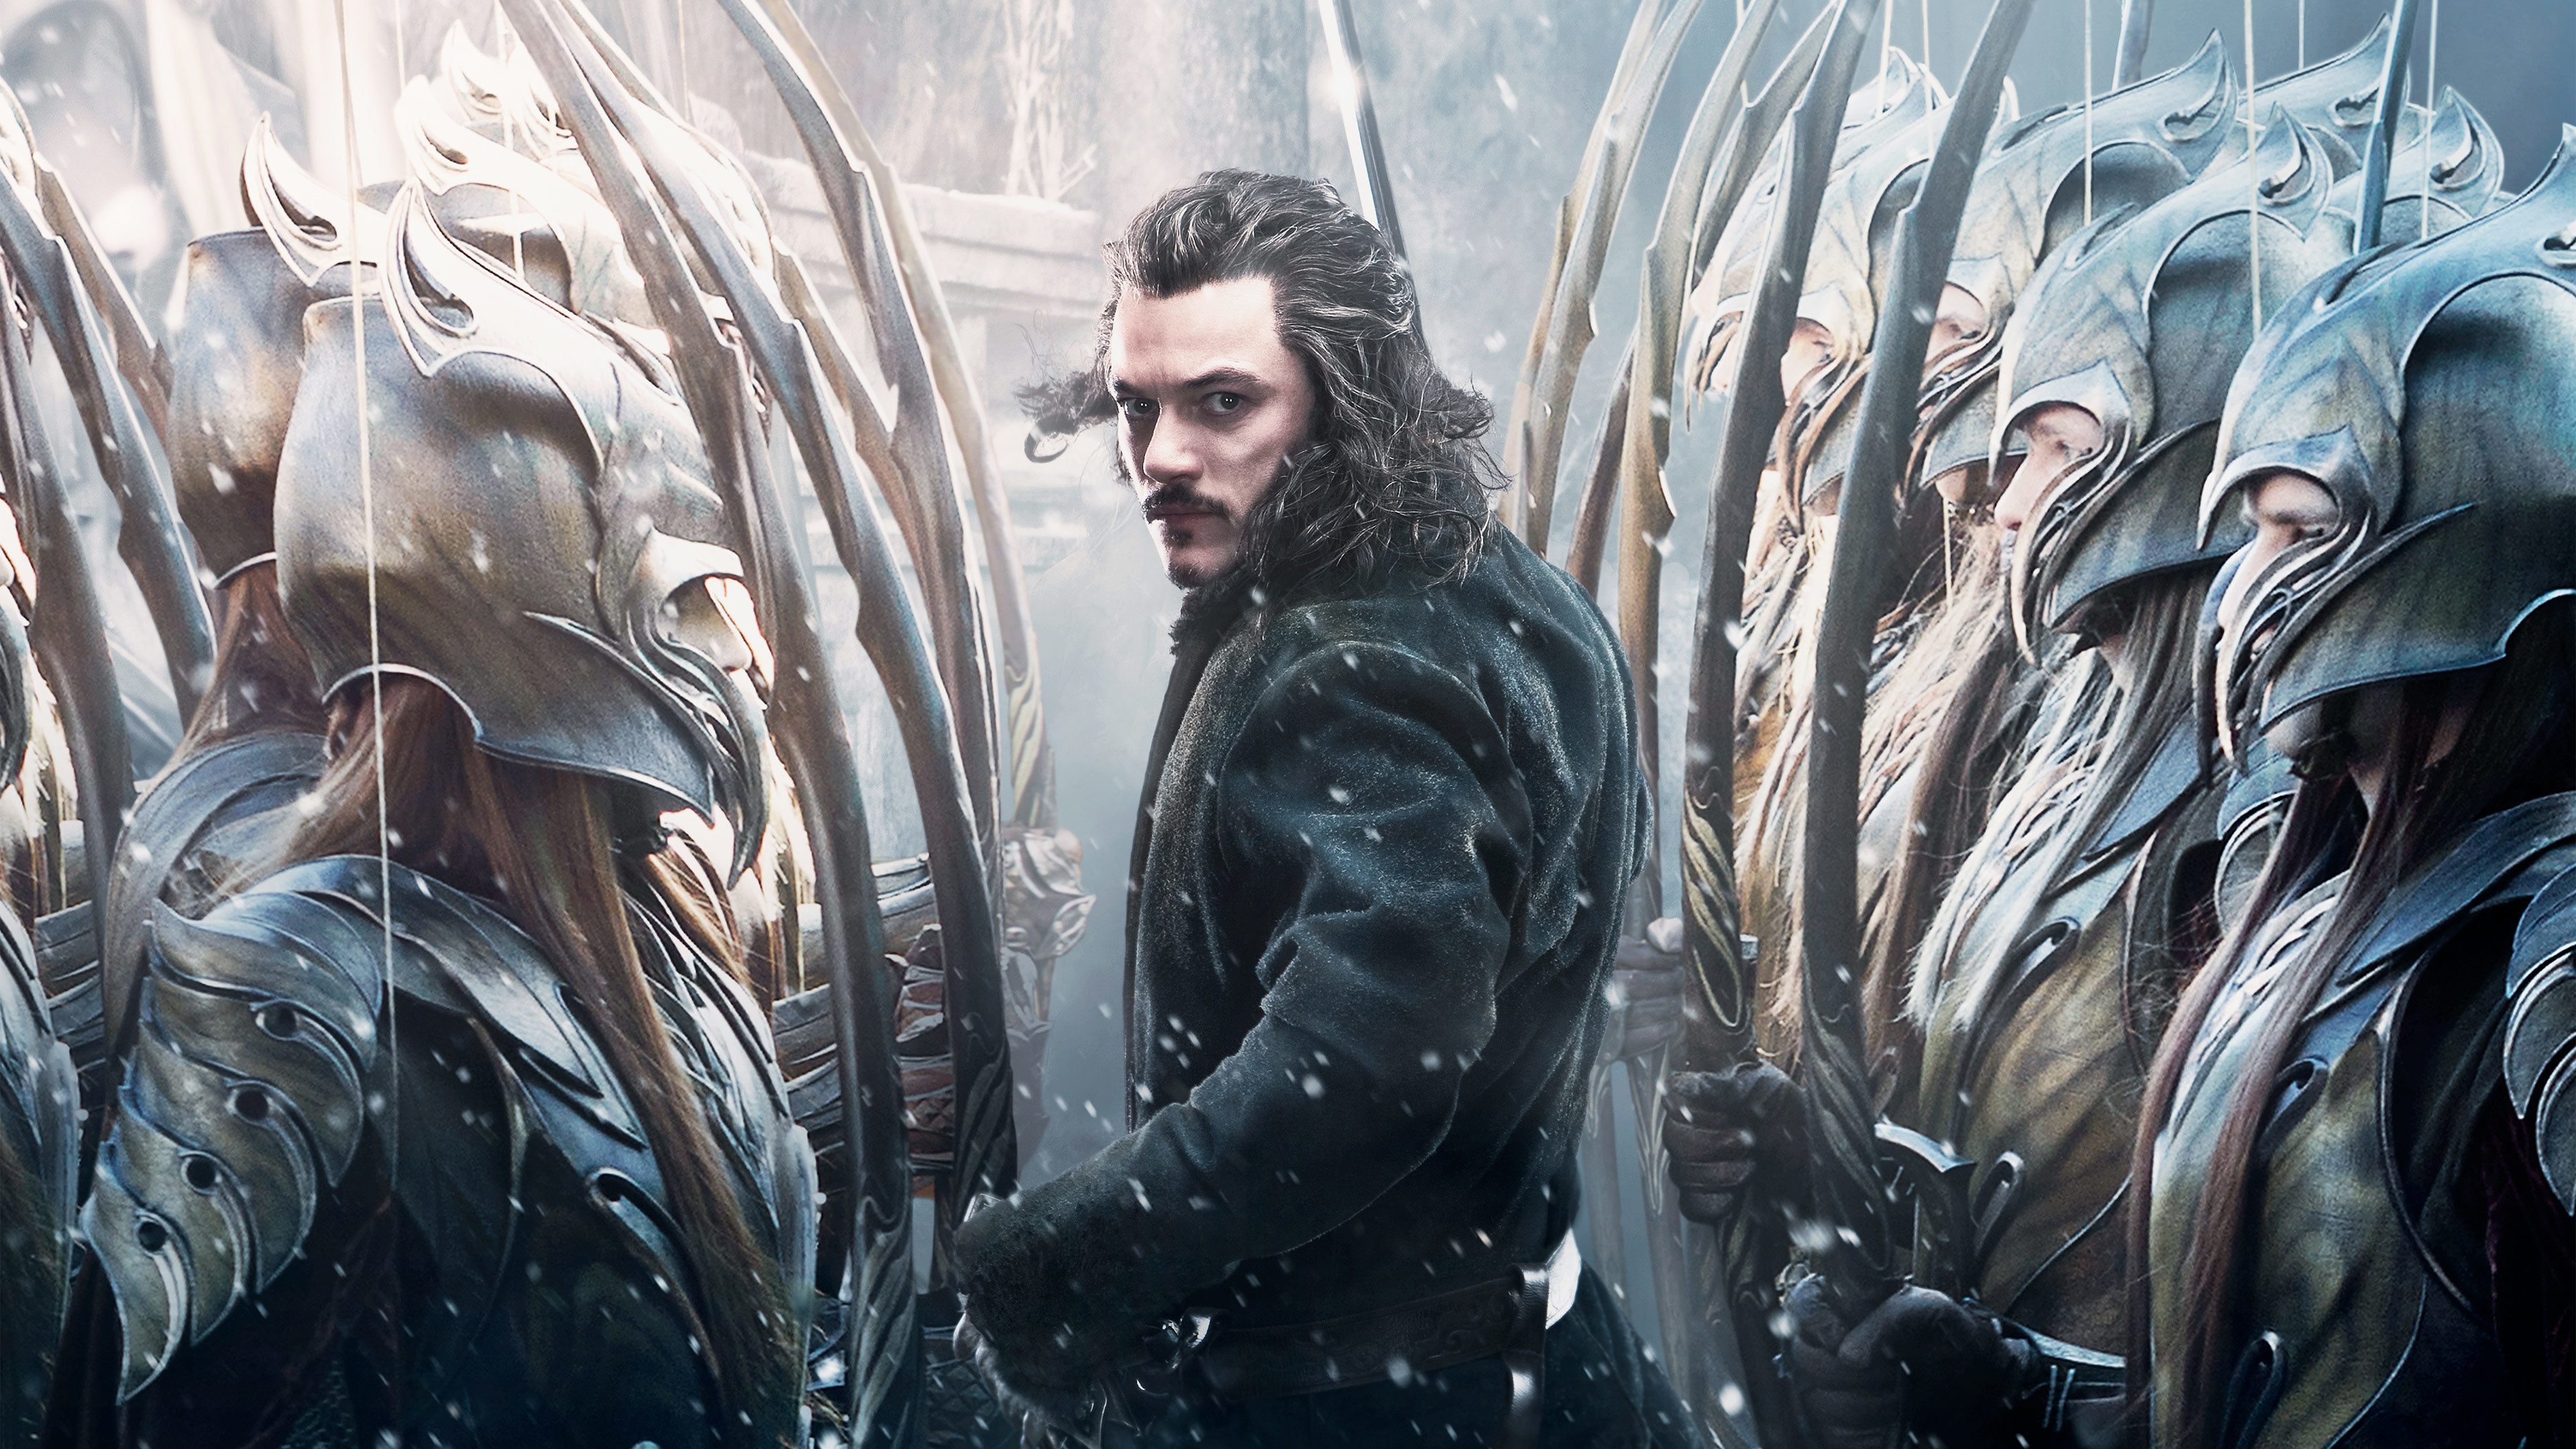 The Hobbit (Movie): Bard the Bowman, A Man of Laketown and a descendant of the ancient Lords of Dale. 3840x2160 4K Wallpaper.